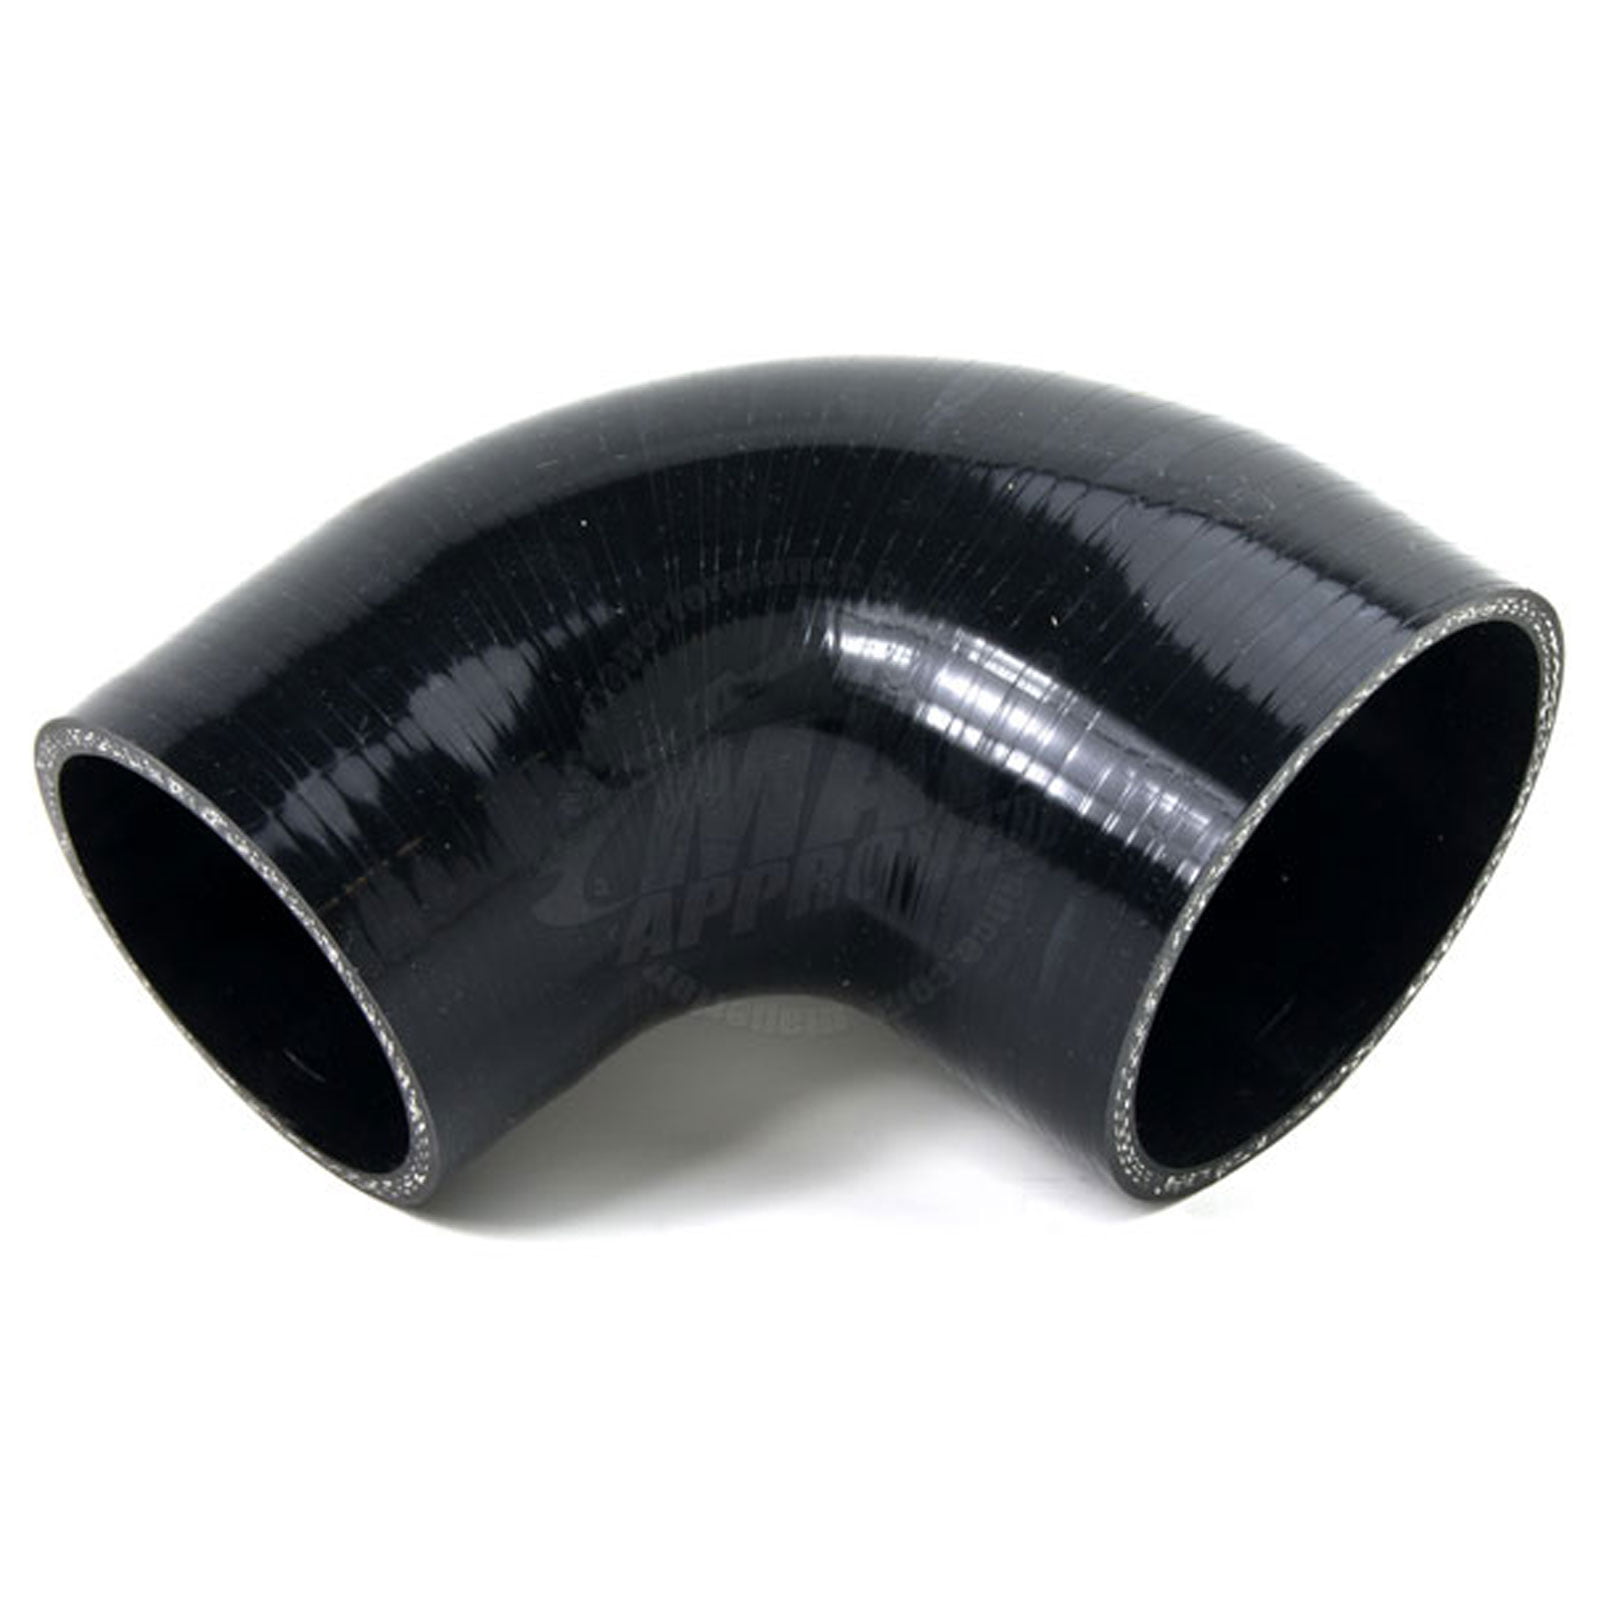 5/8" 1" 90 Degree Reducer Silicone Hose 19 to 25mm Turbo Coupler Pipe Black